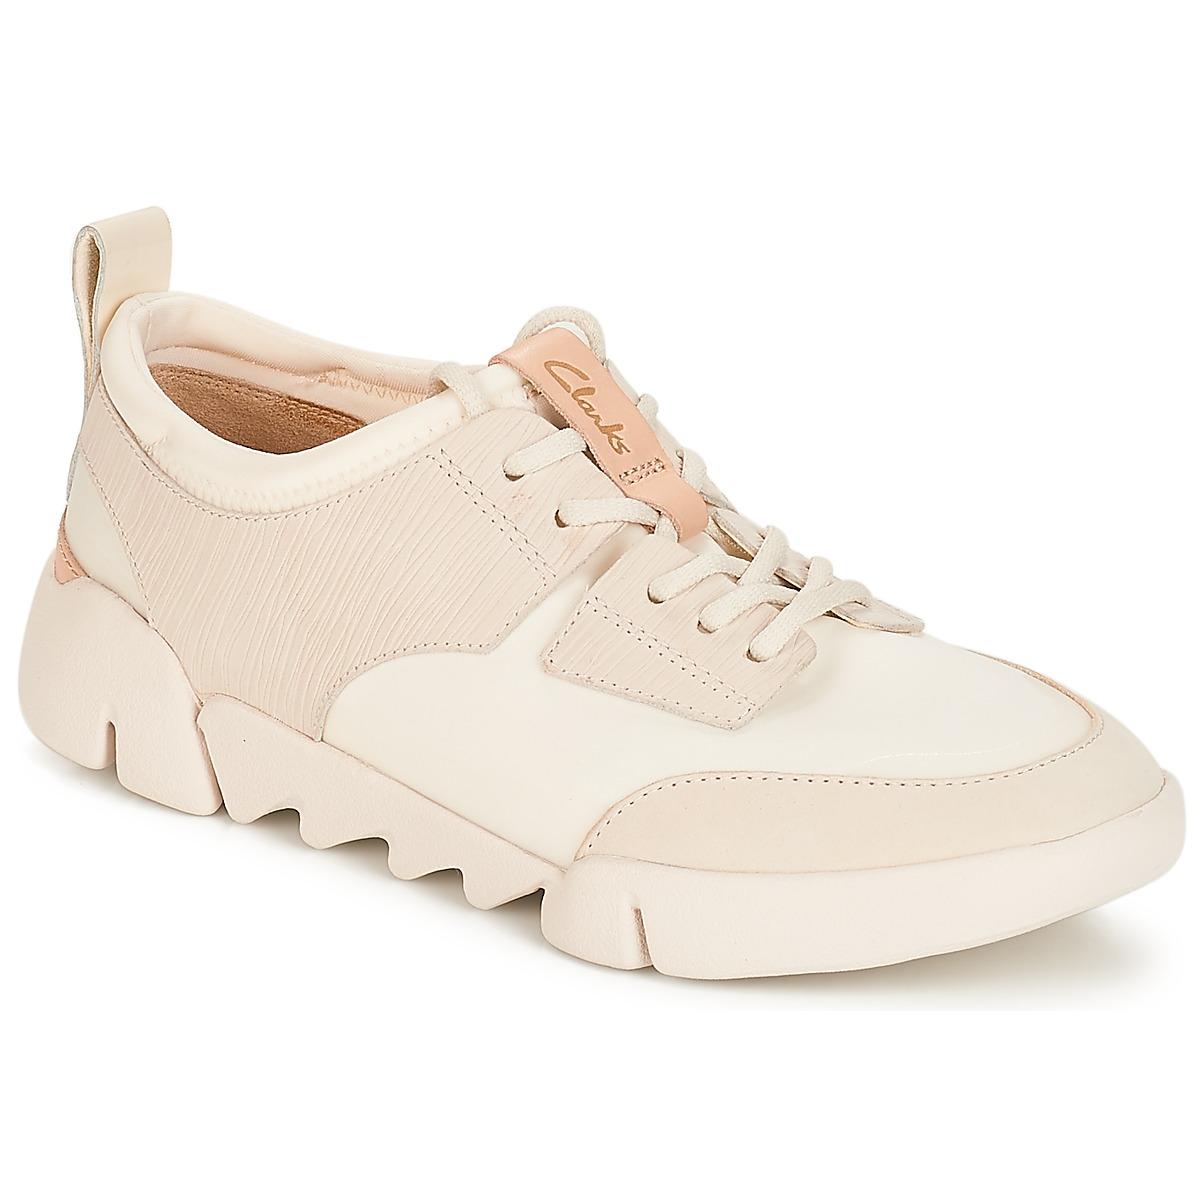 Clarks Tri Spirit Shoes (trainers) in Beige (Natural) - Save 25% - Lyst